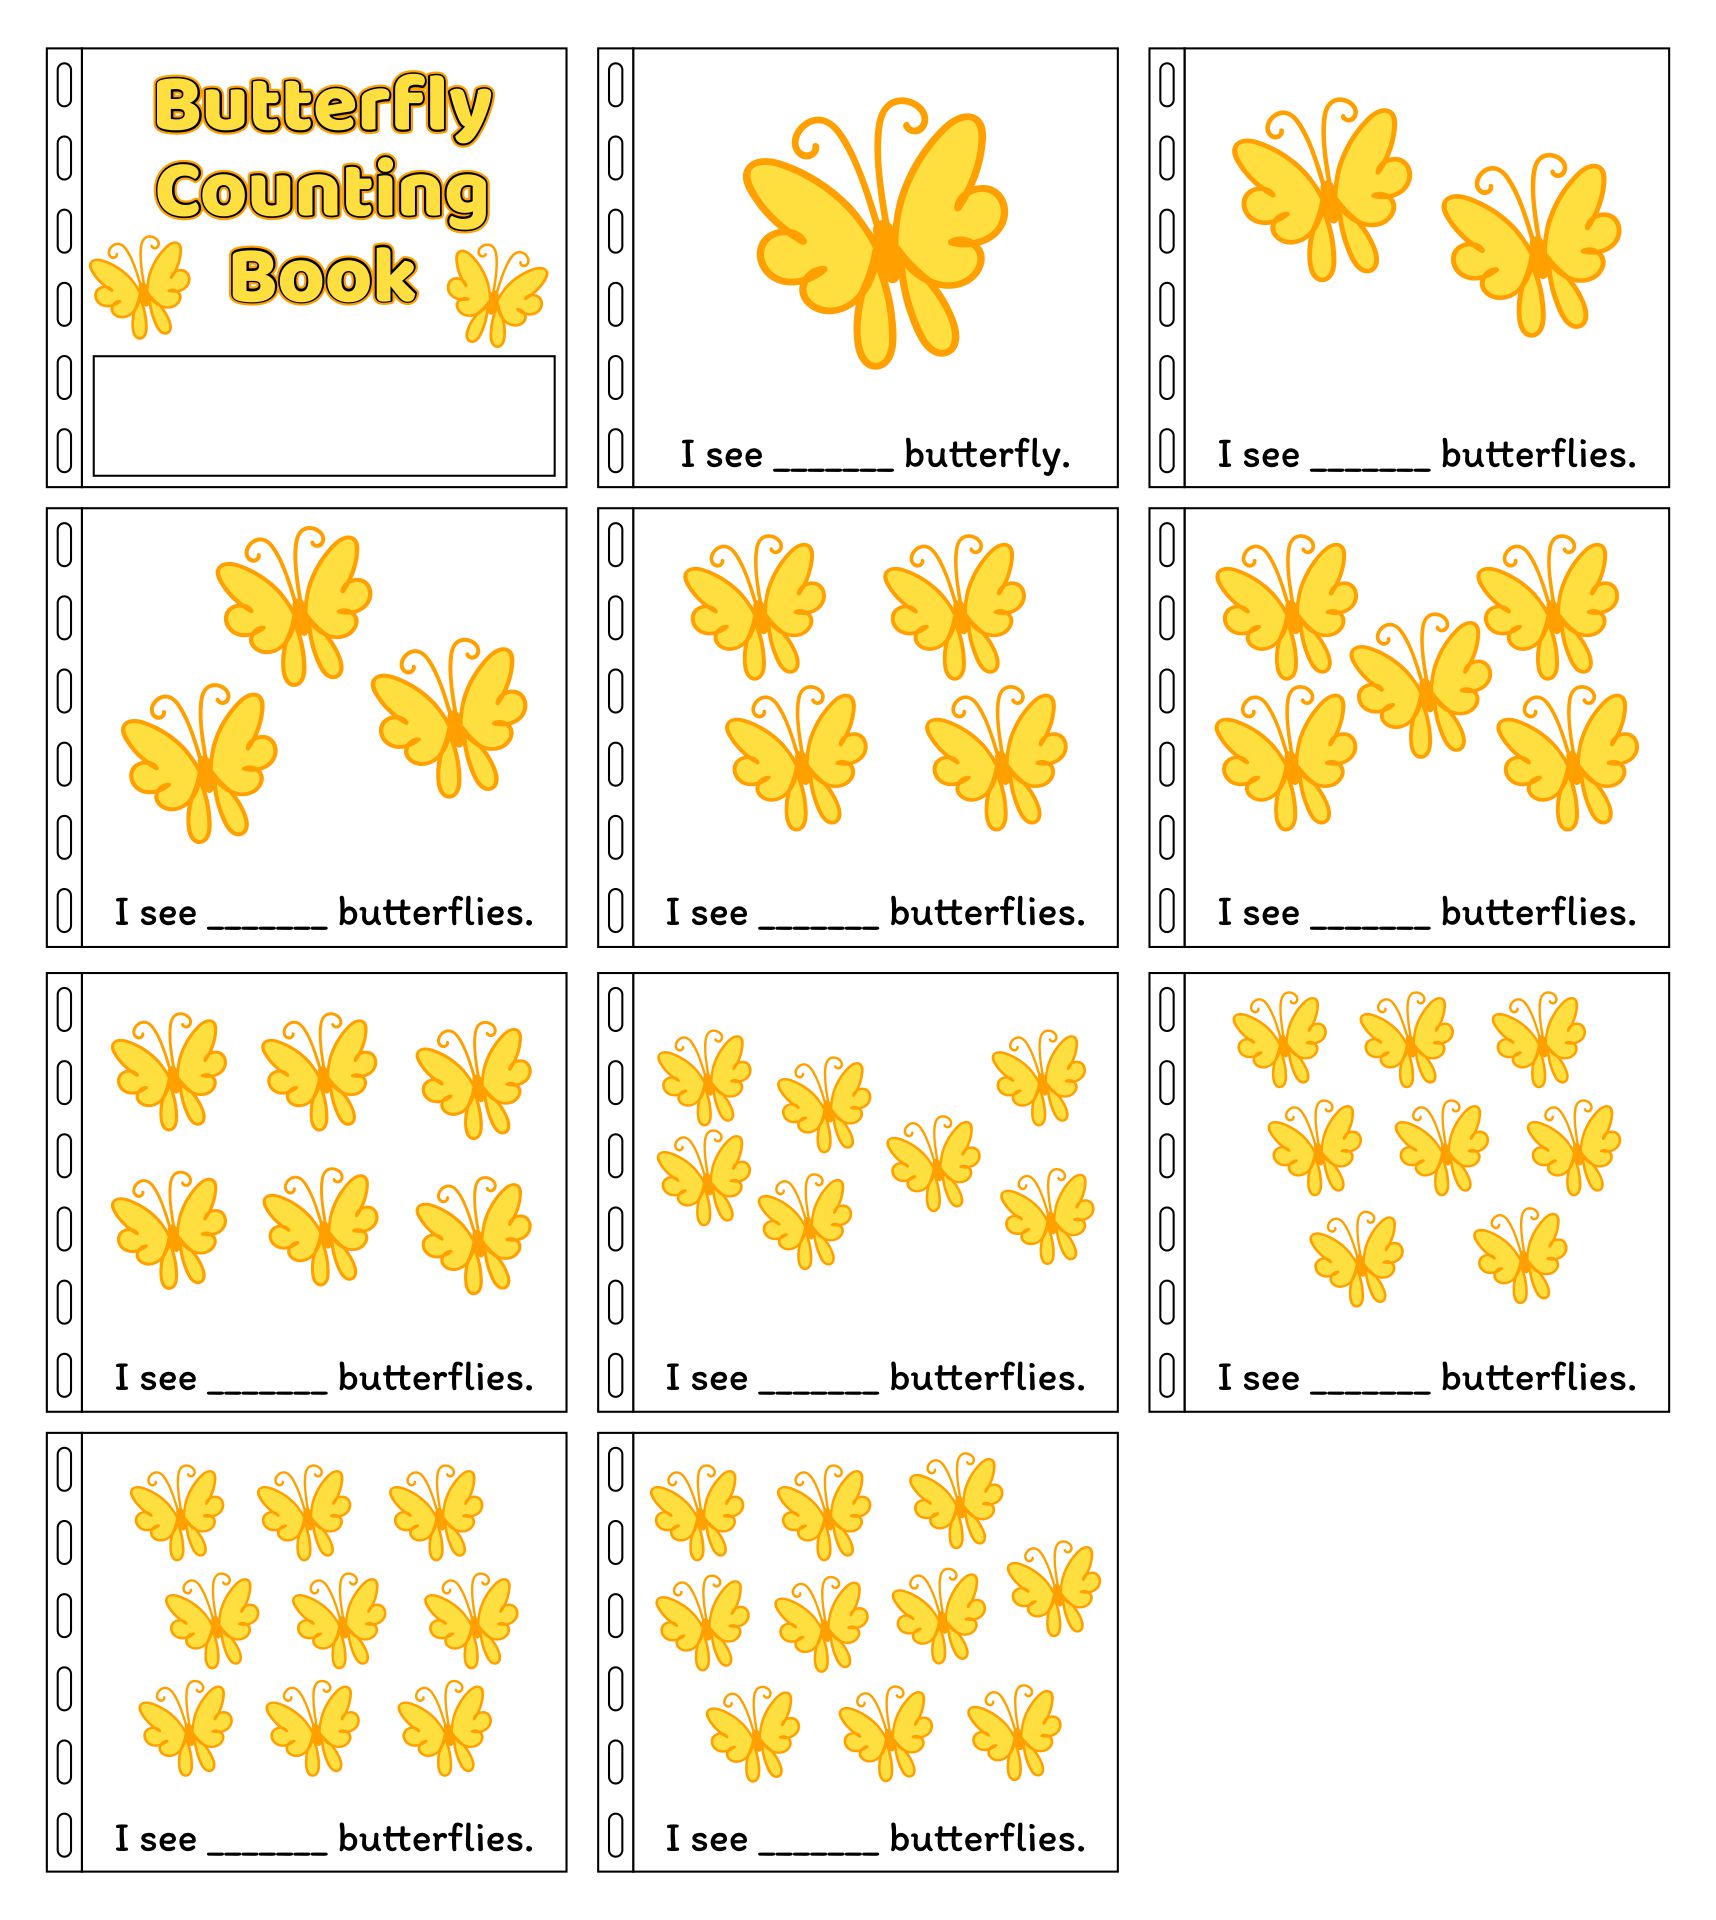 Butterfly Counting Book Printable